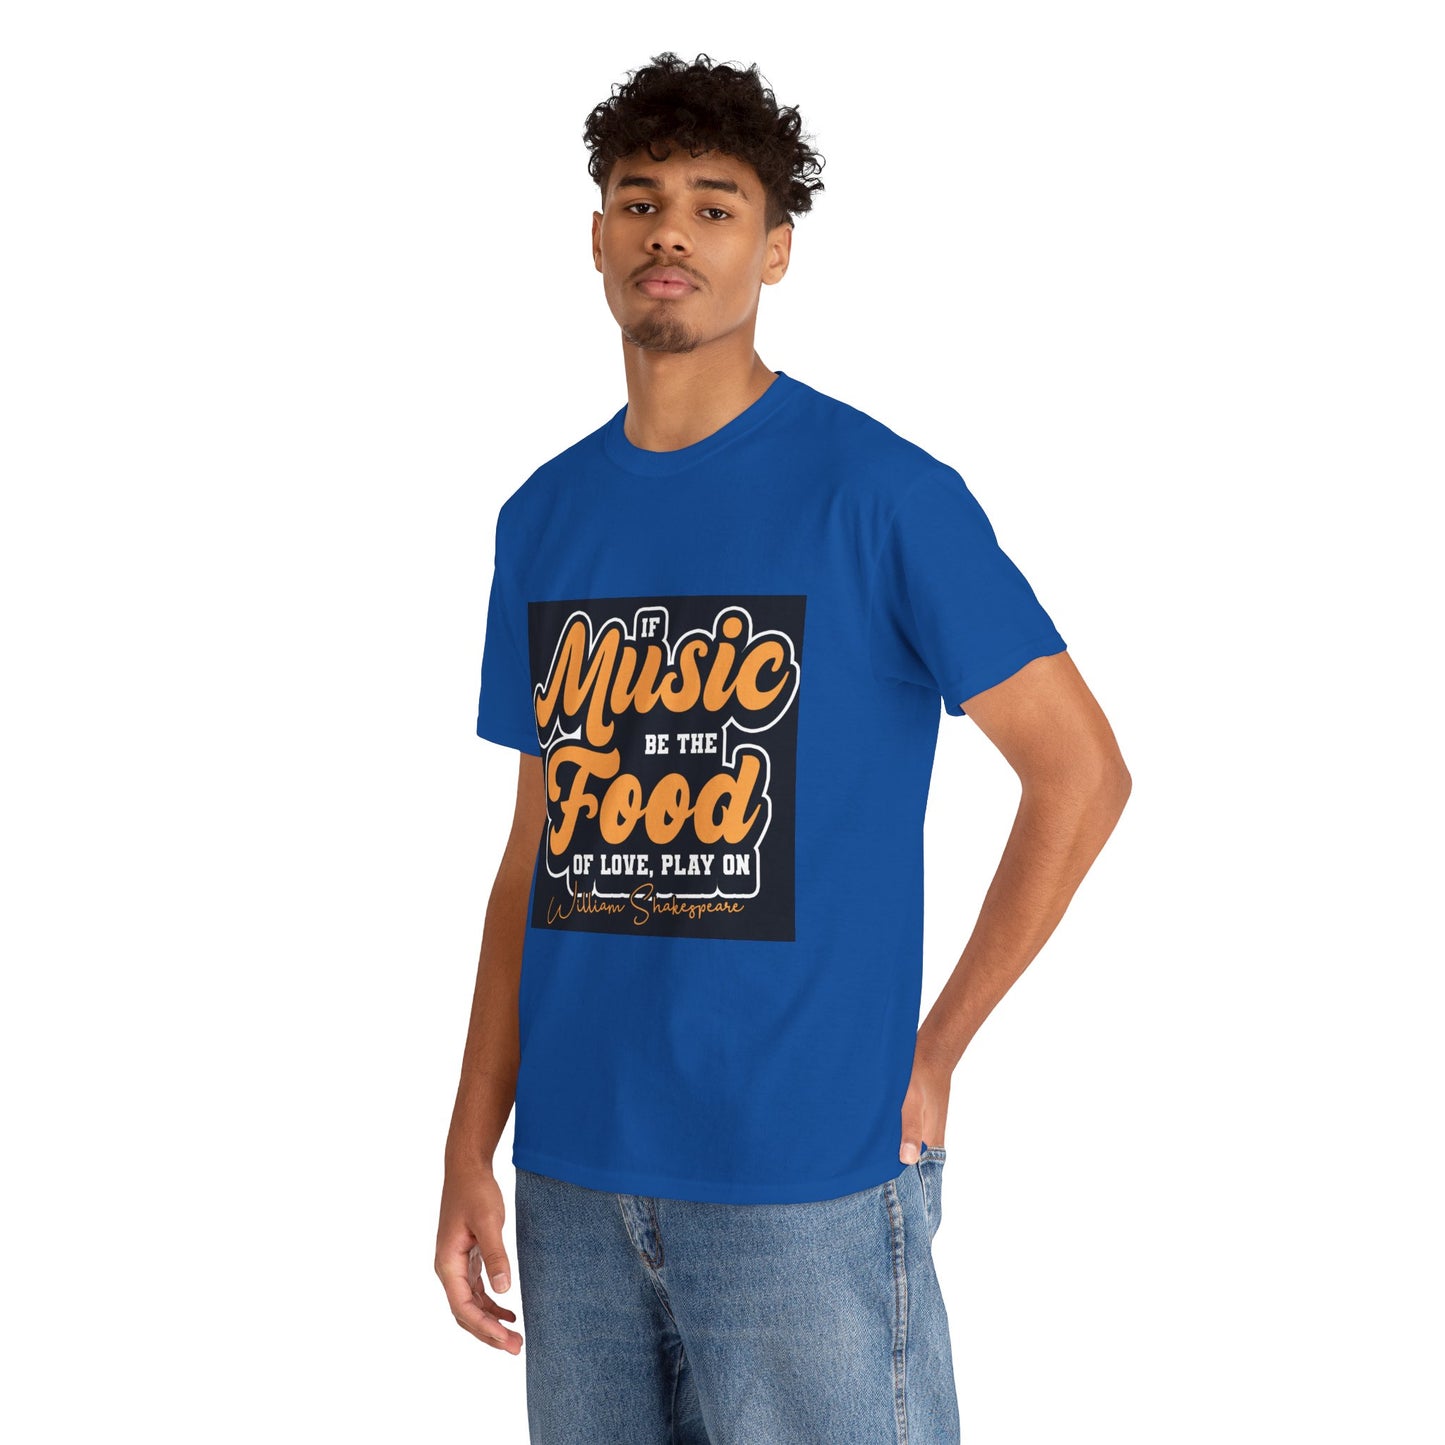 The Free Spirit T-Shirt: If music be the food of love, play on